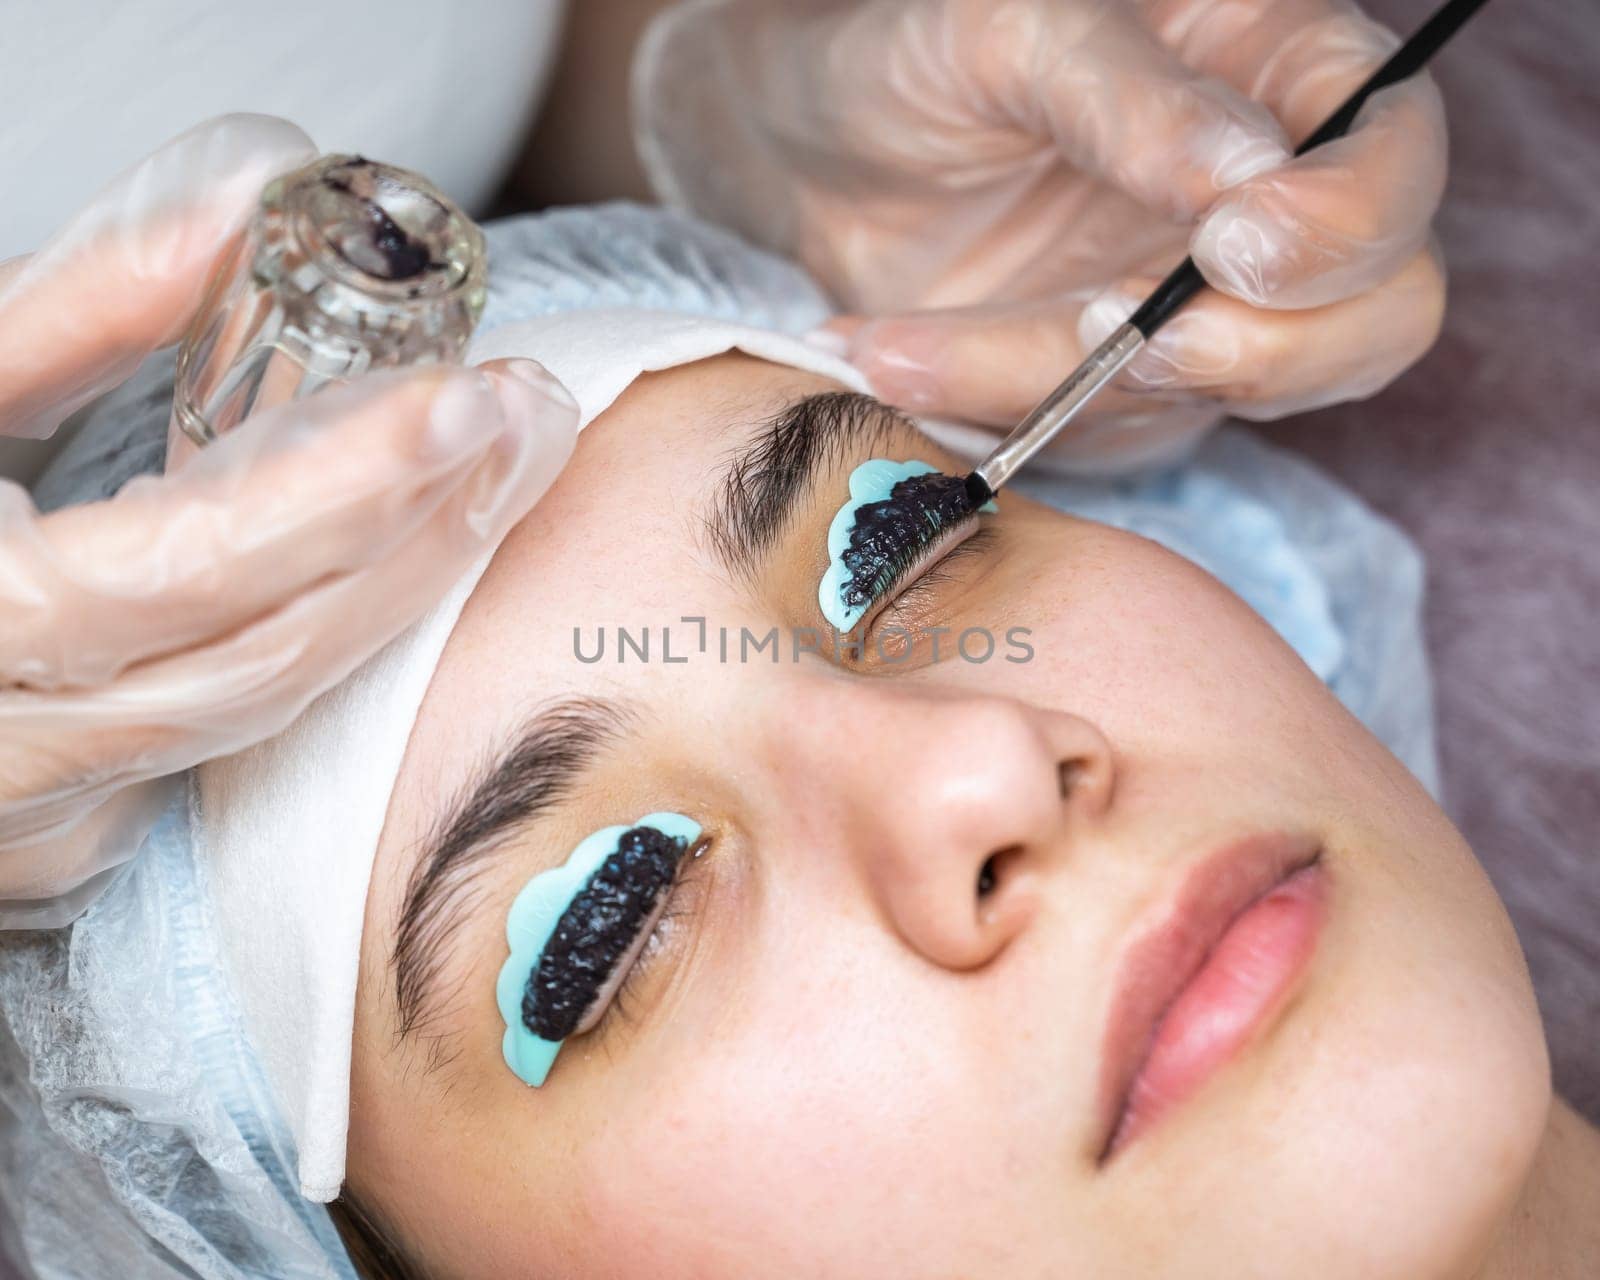 Close-up portrait of a woman on eyelash lamination procedure. The master applies tint to the eyelashes